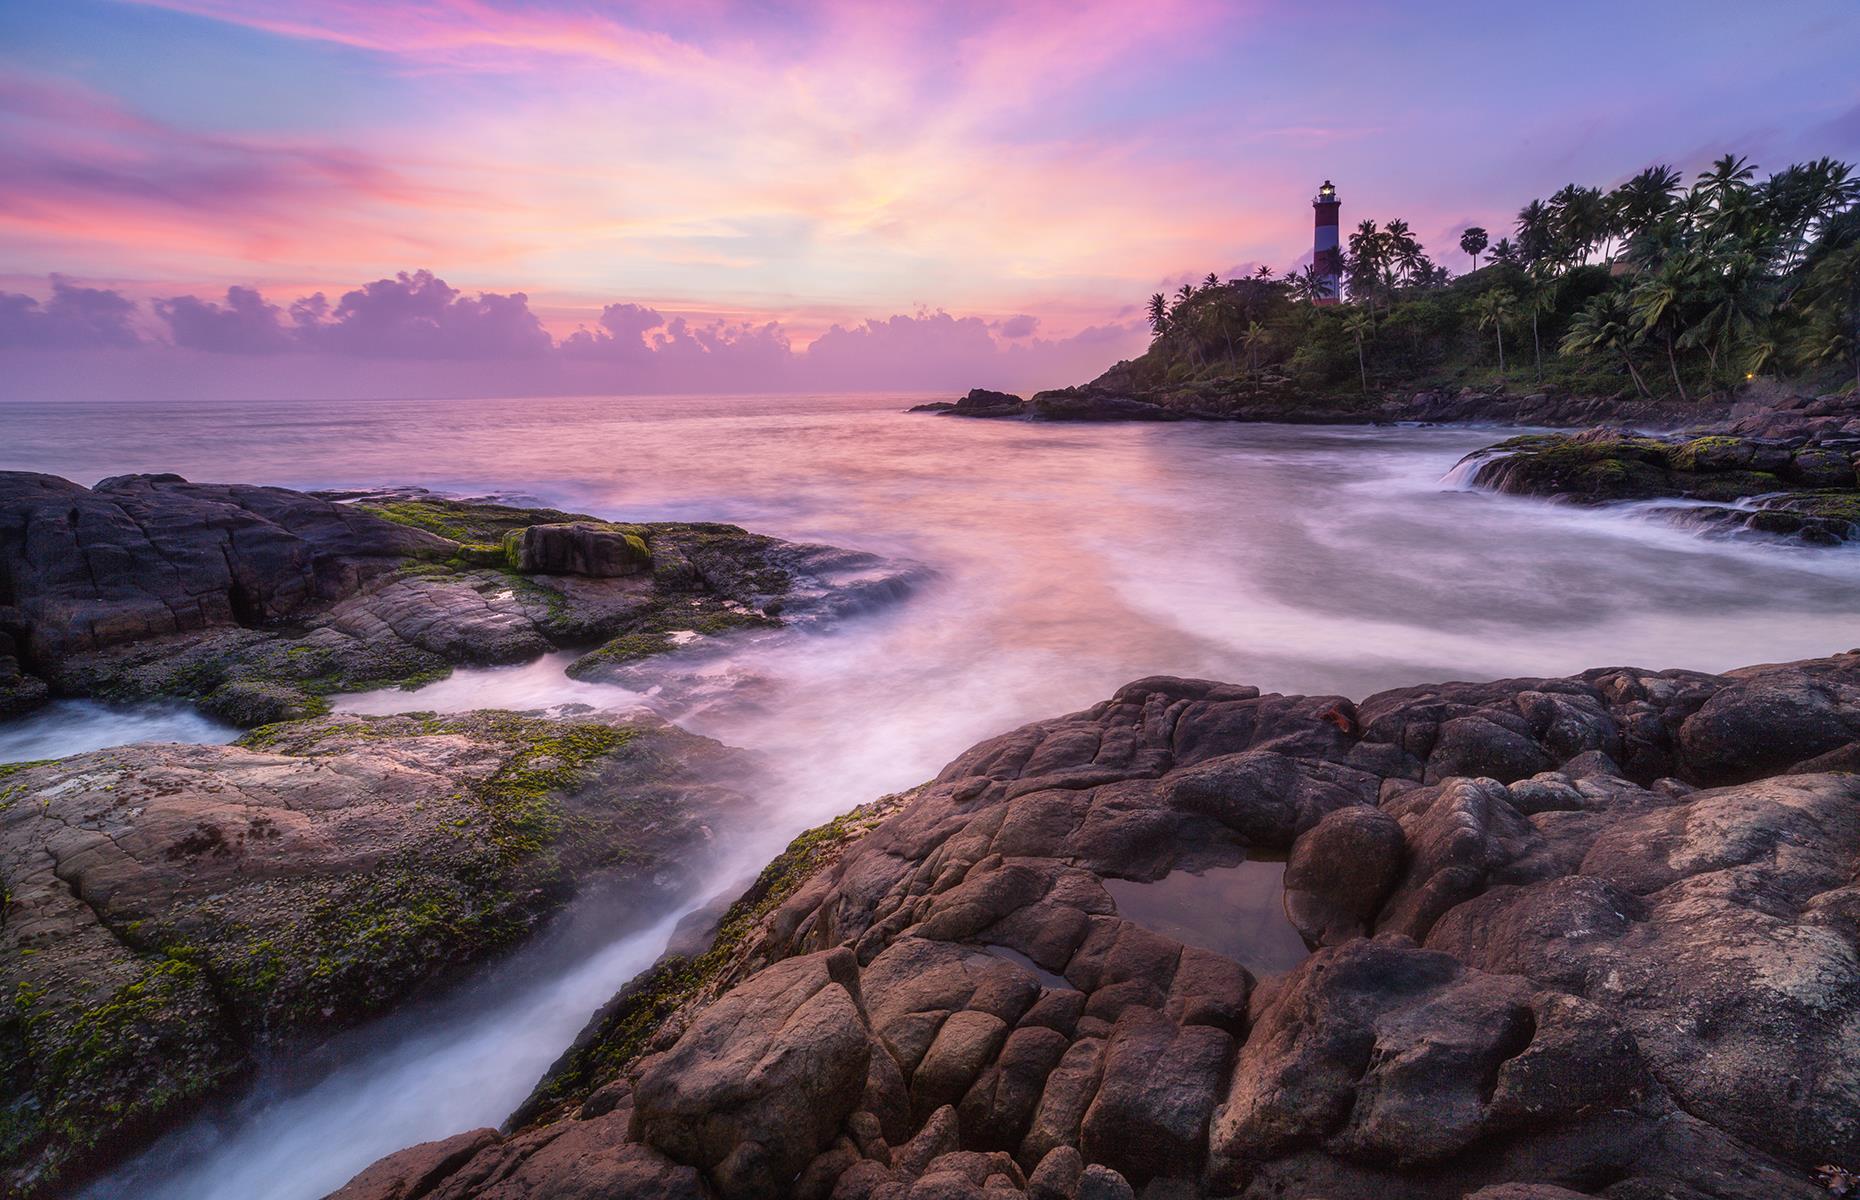 It might be one of Kerala's most developed resorts, but Kovalam is still stunning. The lighthouse looking out to the ocean is a particularly picturesque spot at sunset, and during the day you can try your hand at yoga, surfing on the bay's decent waves, or just sunning yourself on the yellow sands.